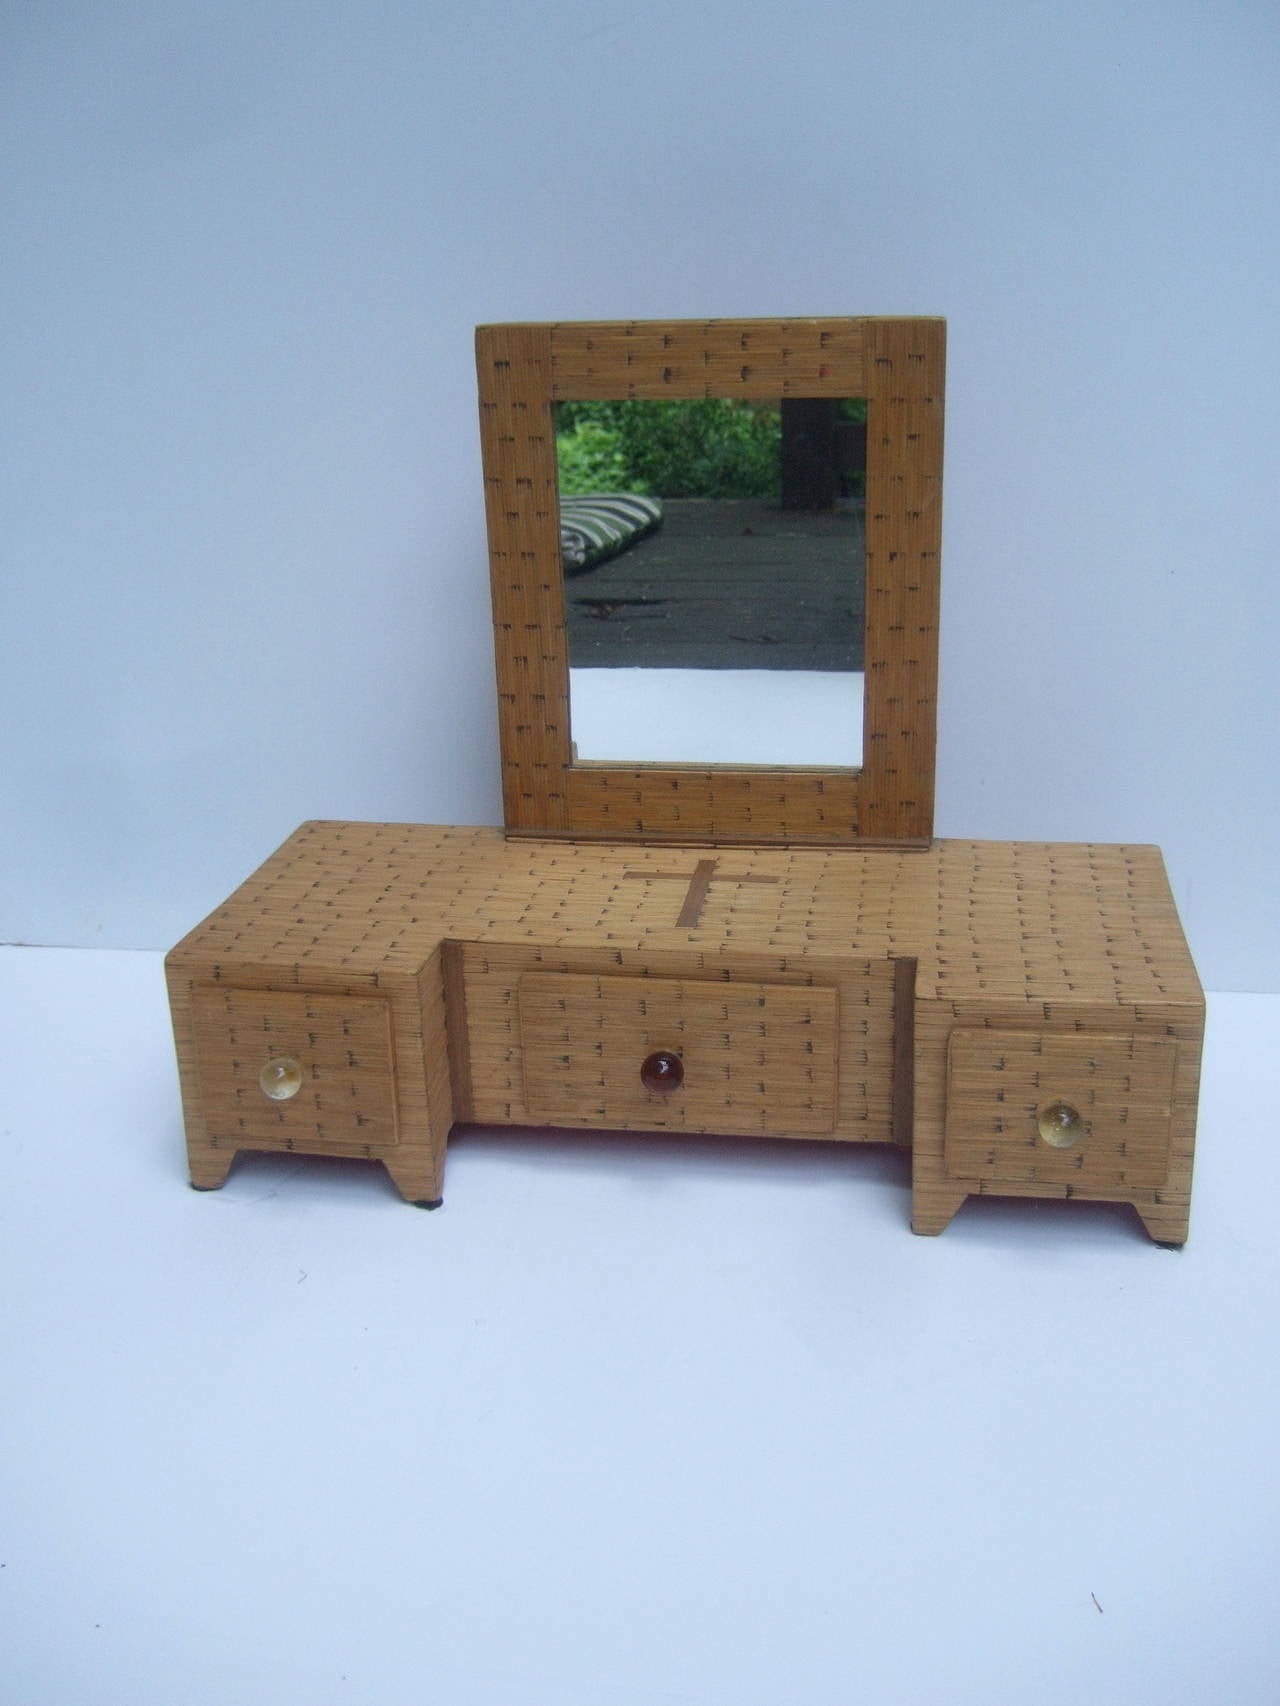 1930s Handmade tramp art match stick diminutive vanity case
The unique compact size vanity case is completely designed 
with wood match sticks. The rows of match sticks frame
the small mirror, cover the top & sides The three drawers